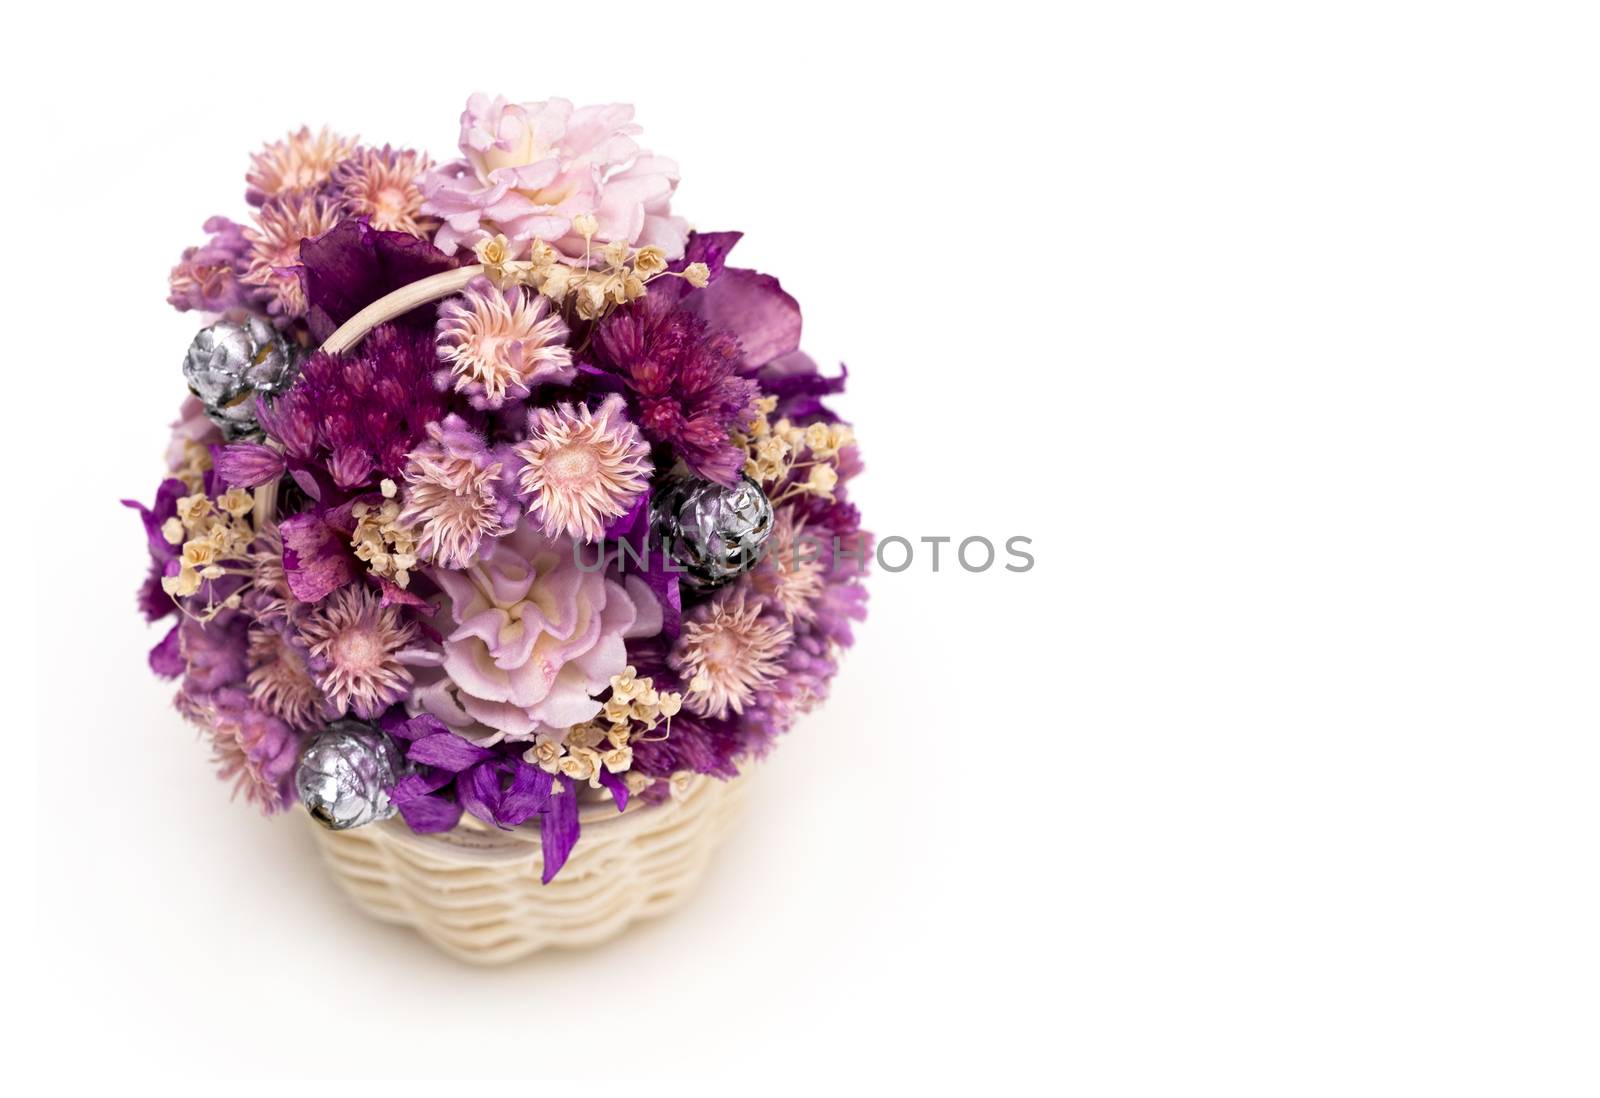 A basket of dried wild flowers on white background. Macro image.